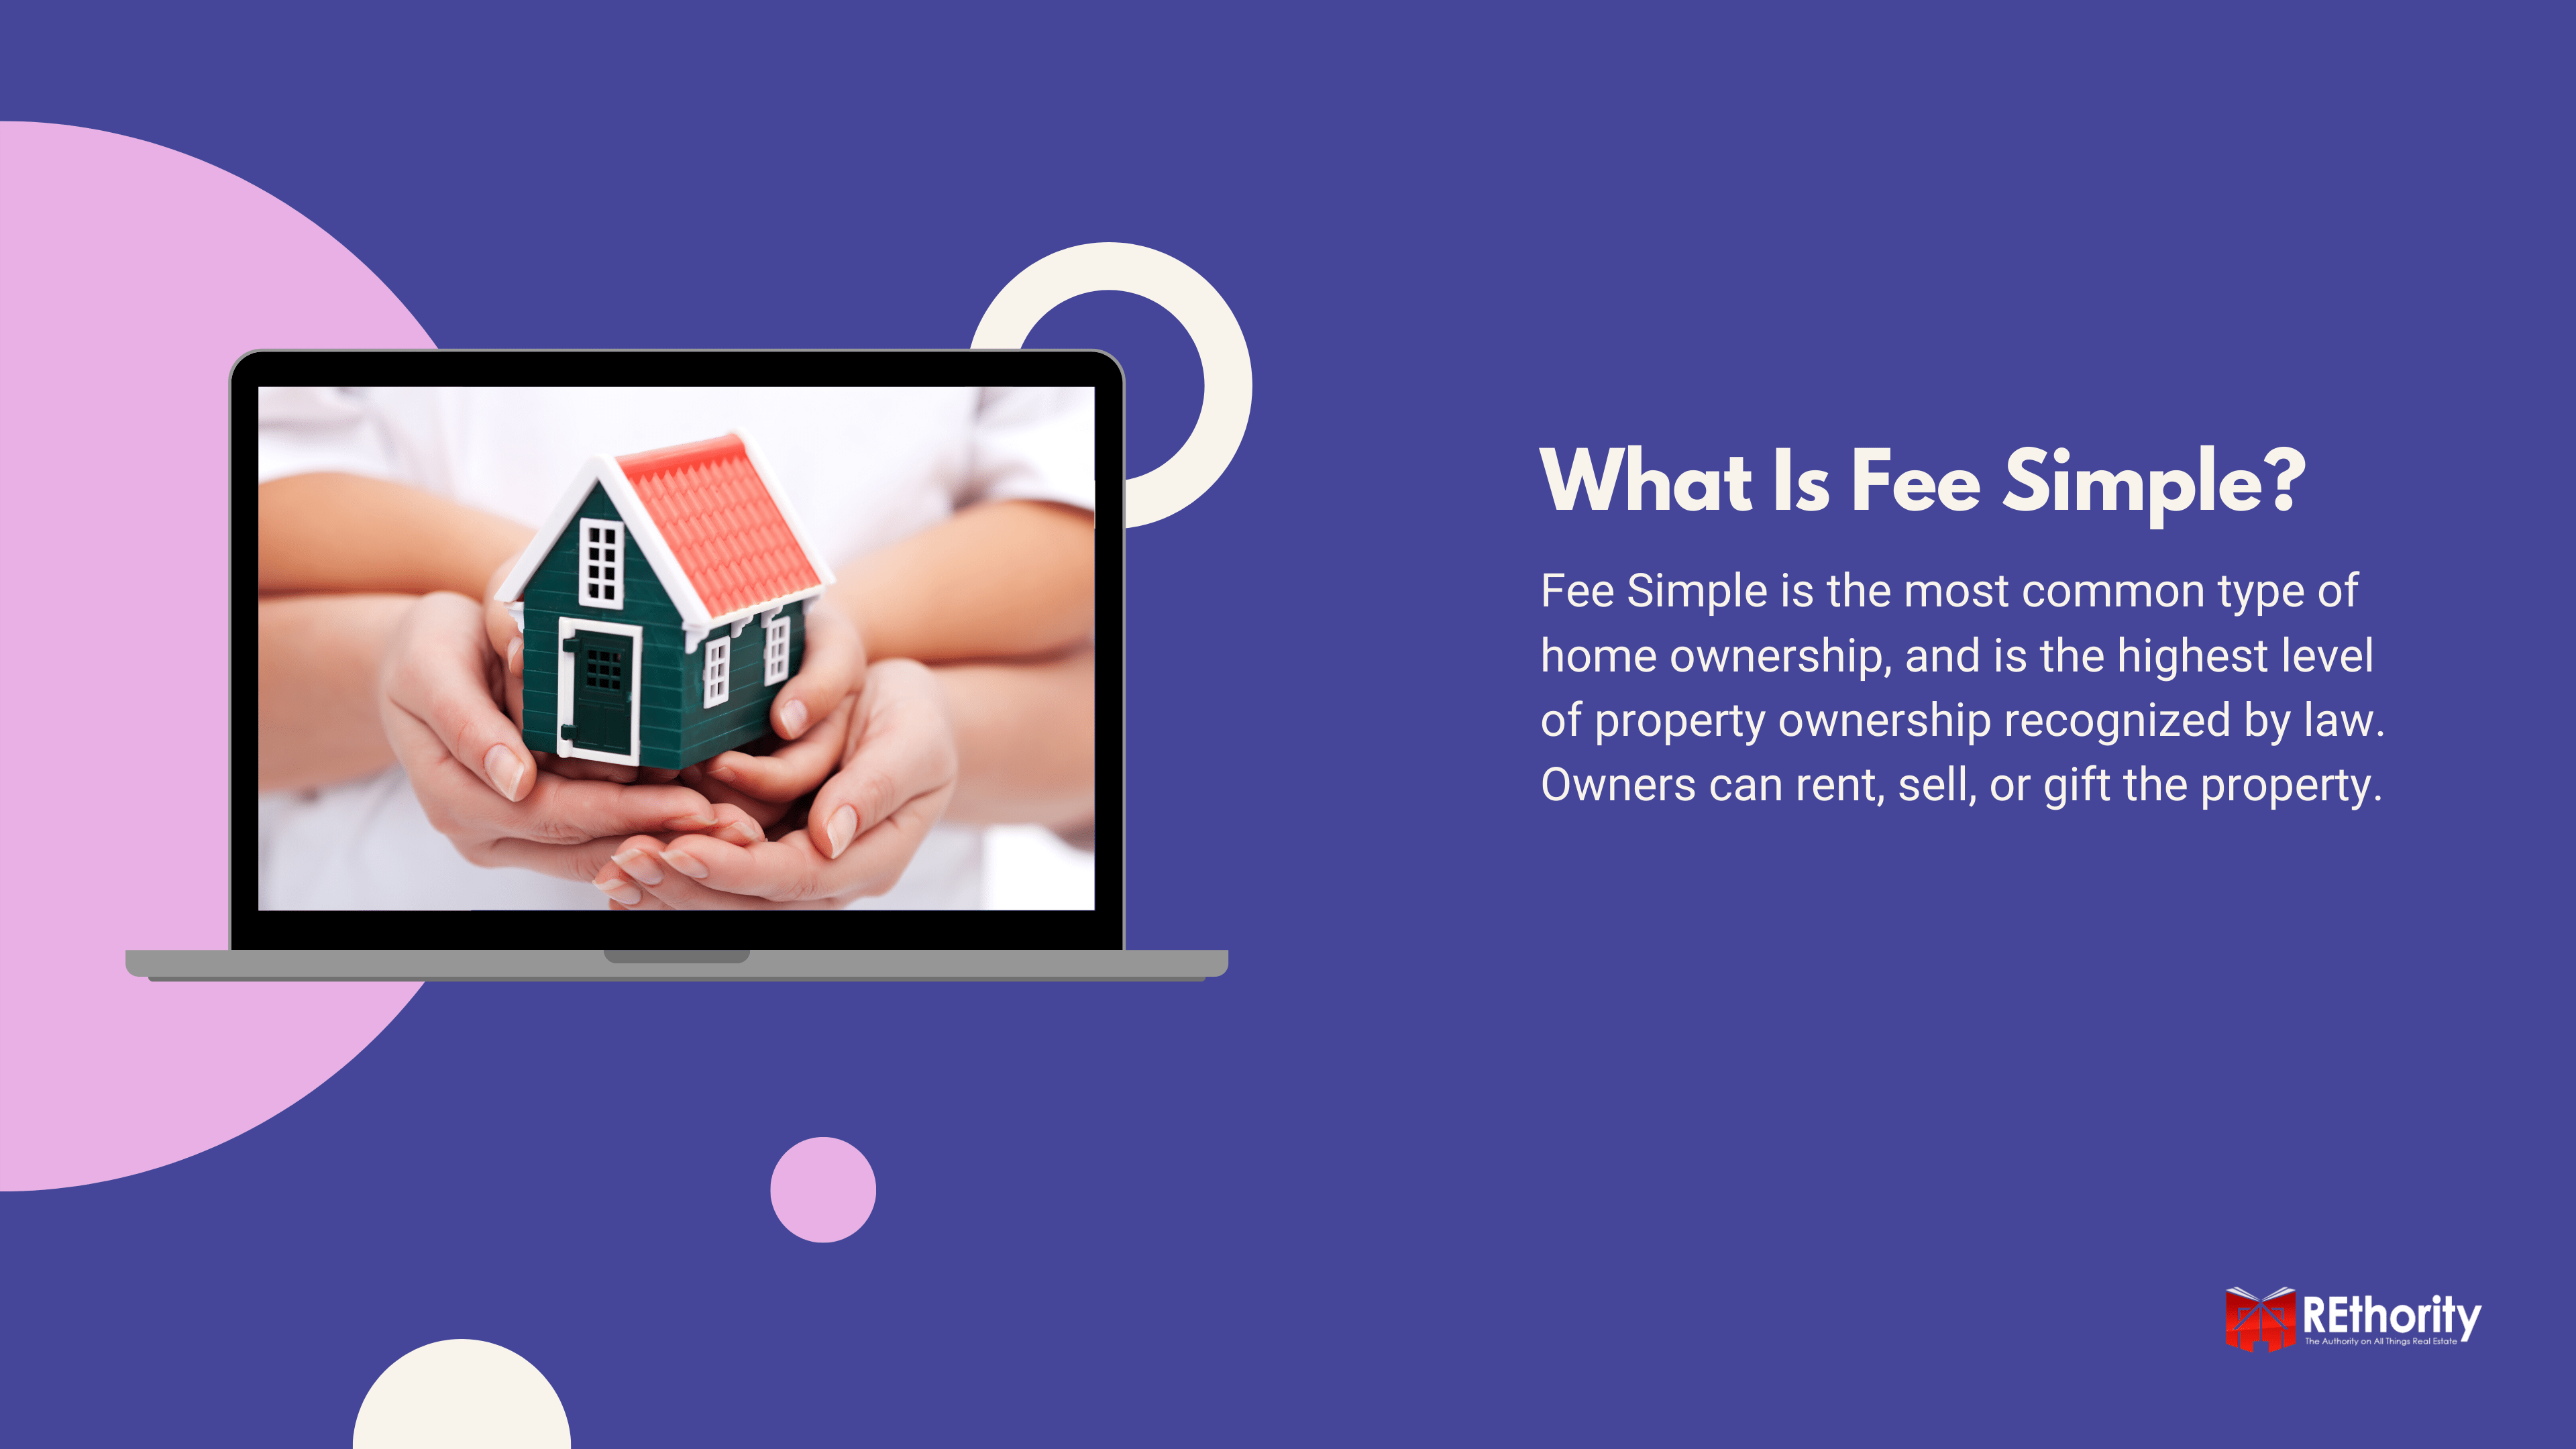 What is fee simple ownership in real estate